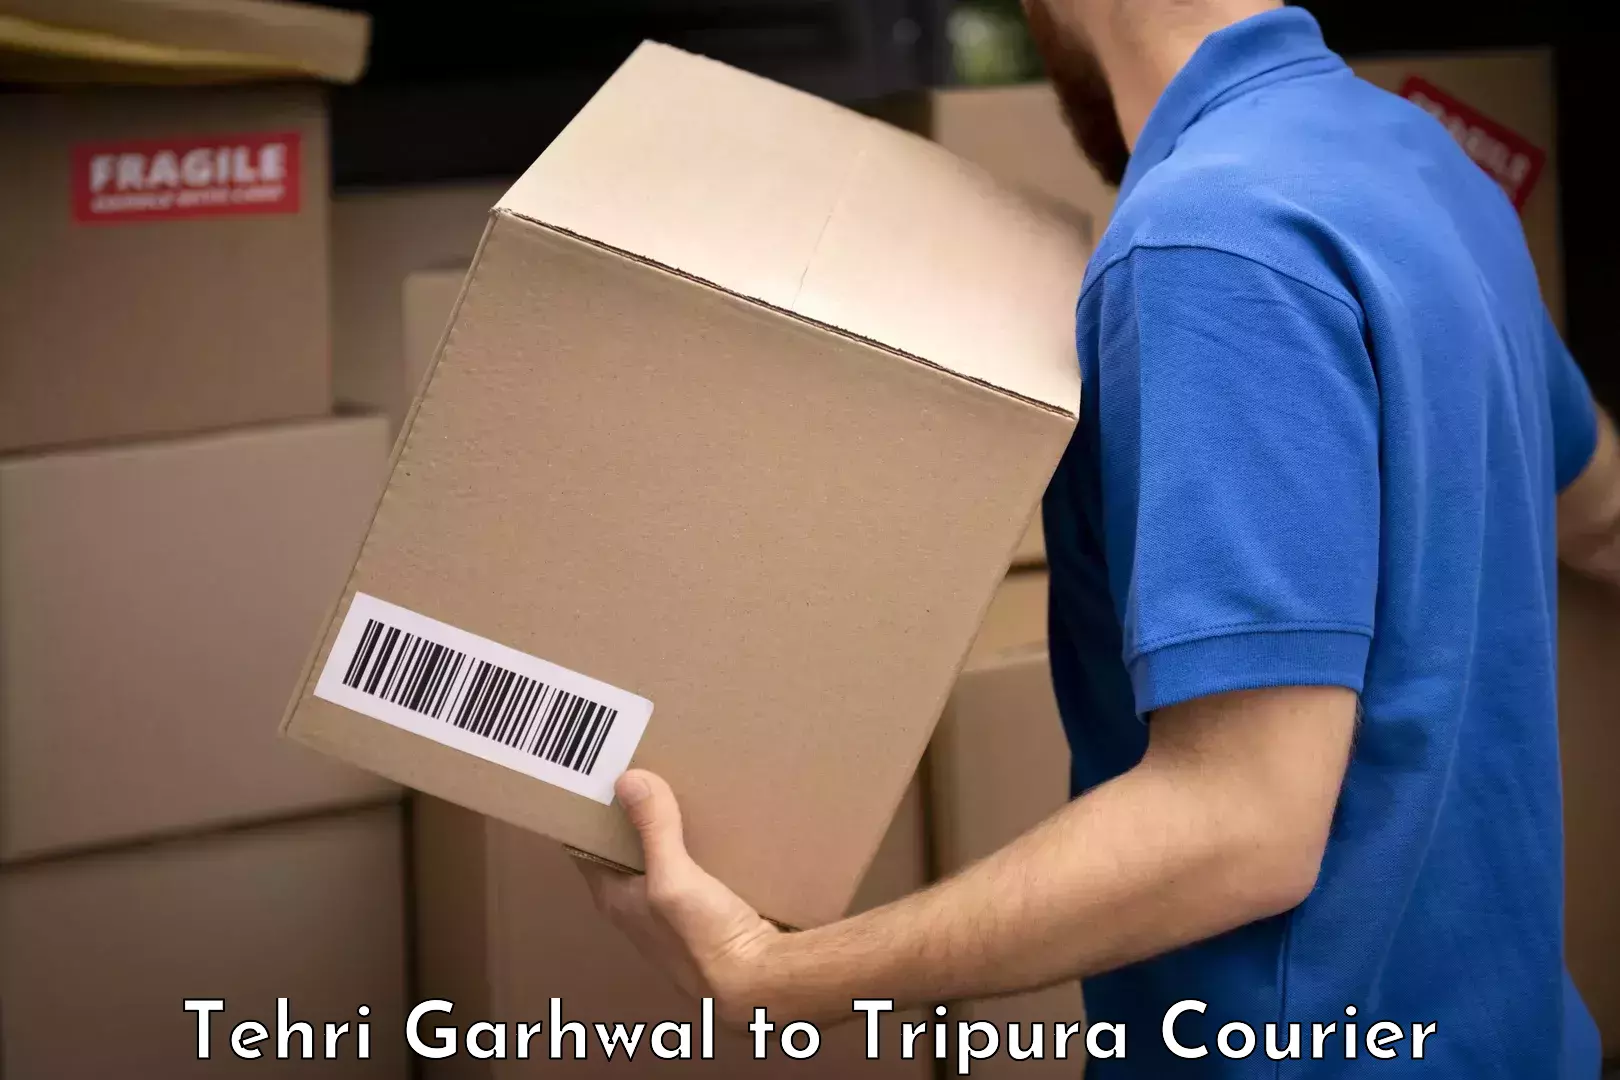 Reliable luggage courier Tehri Garhwal to Udaipur Tripura